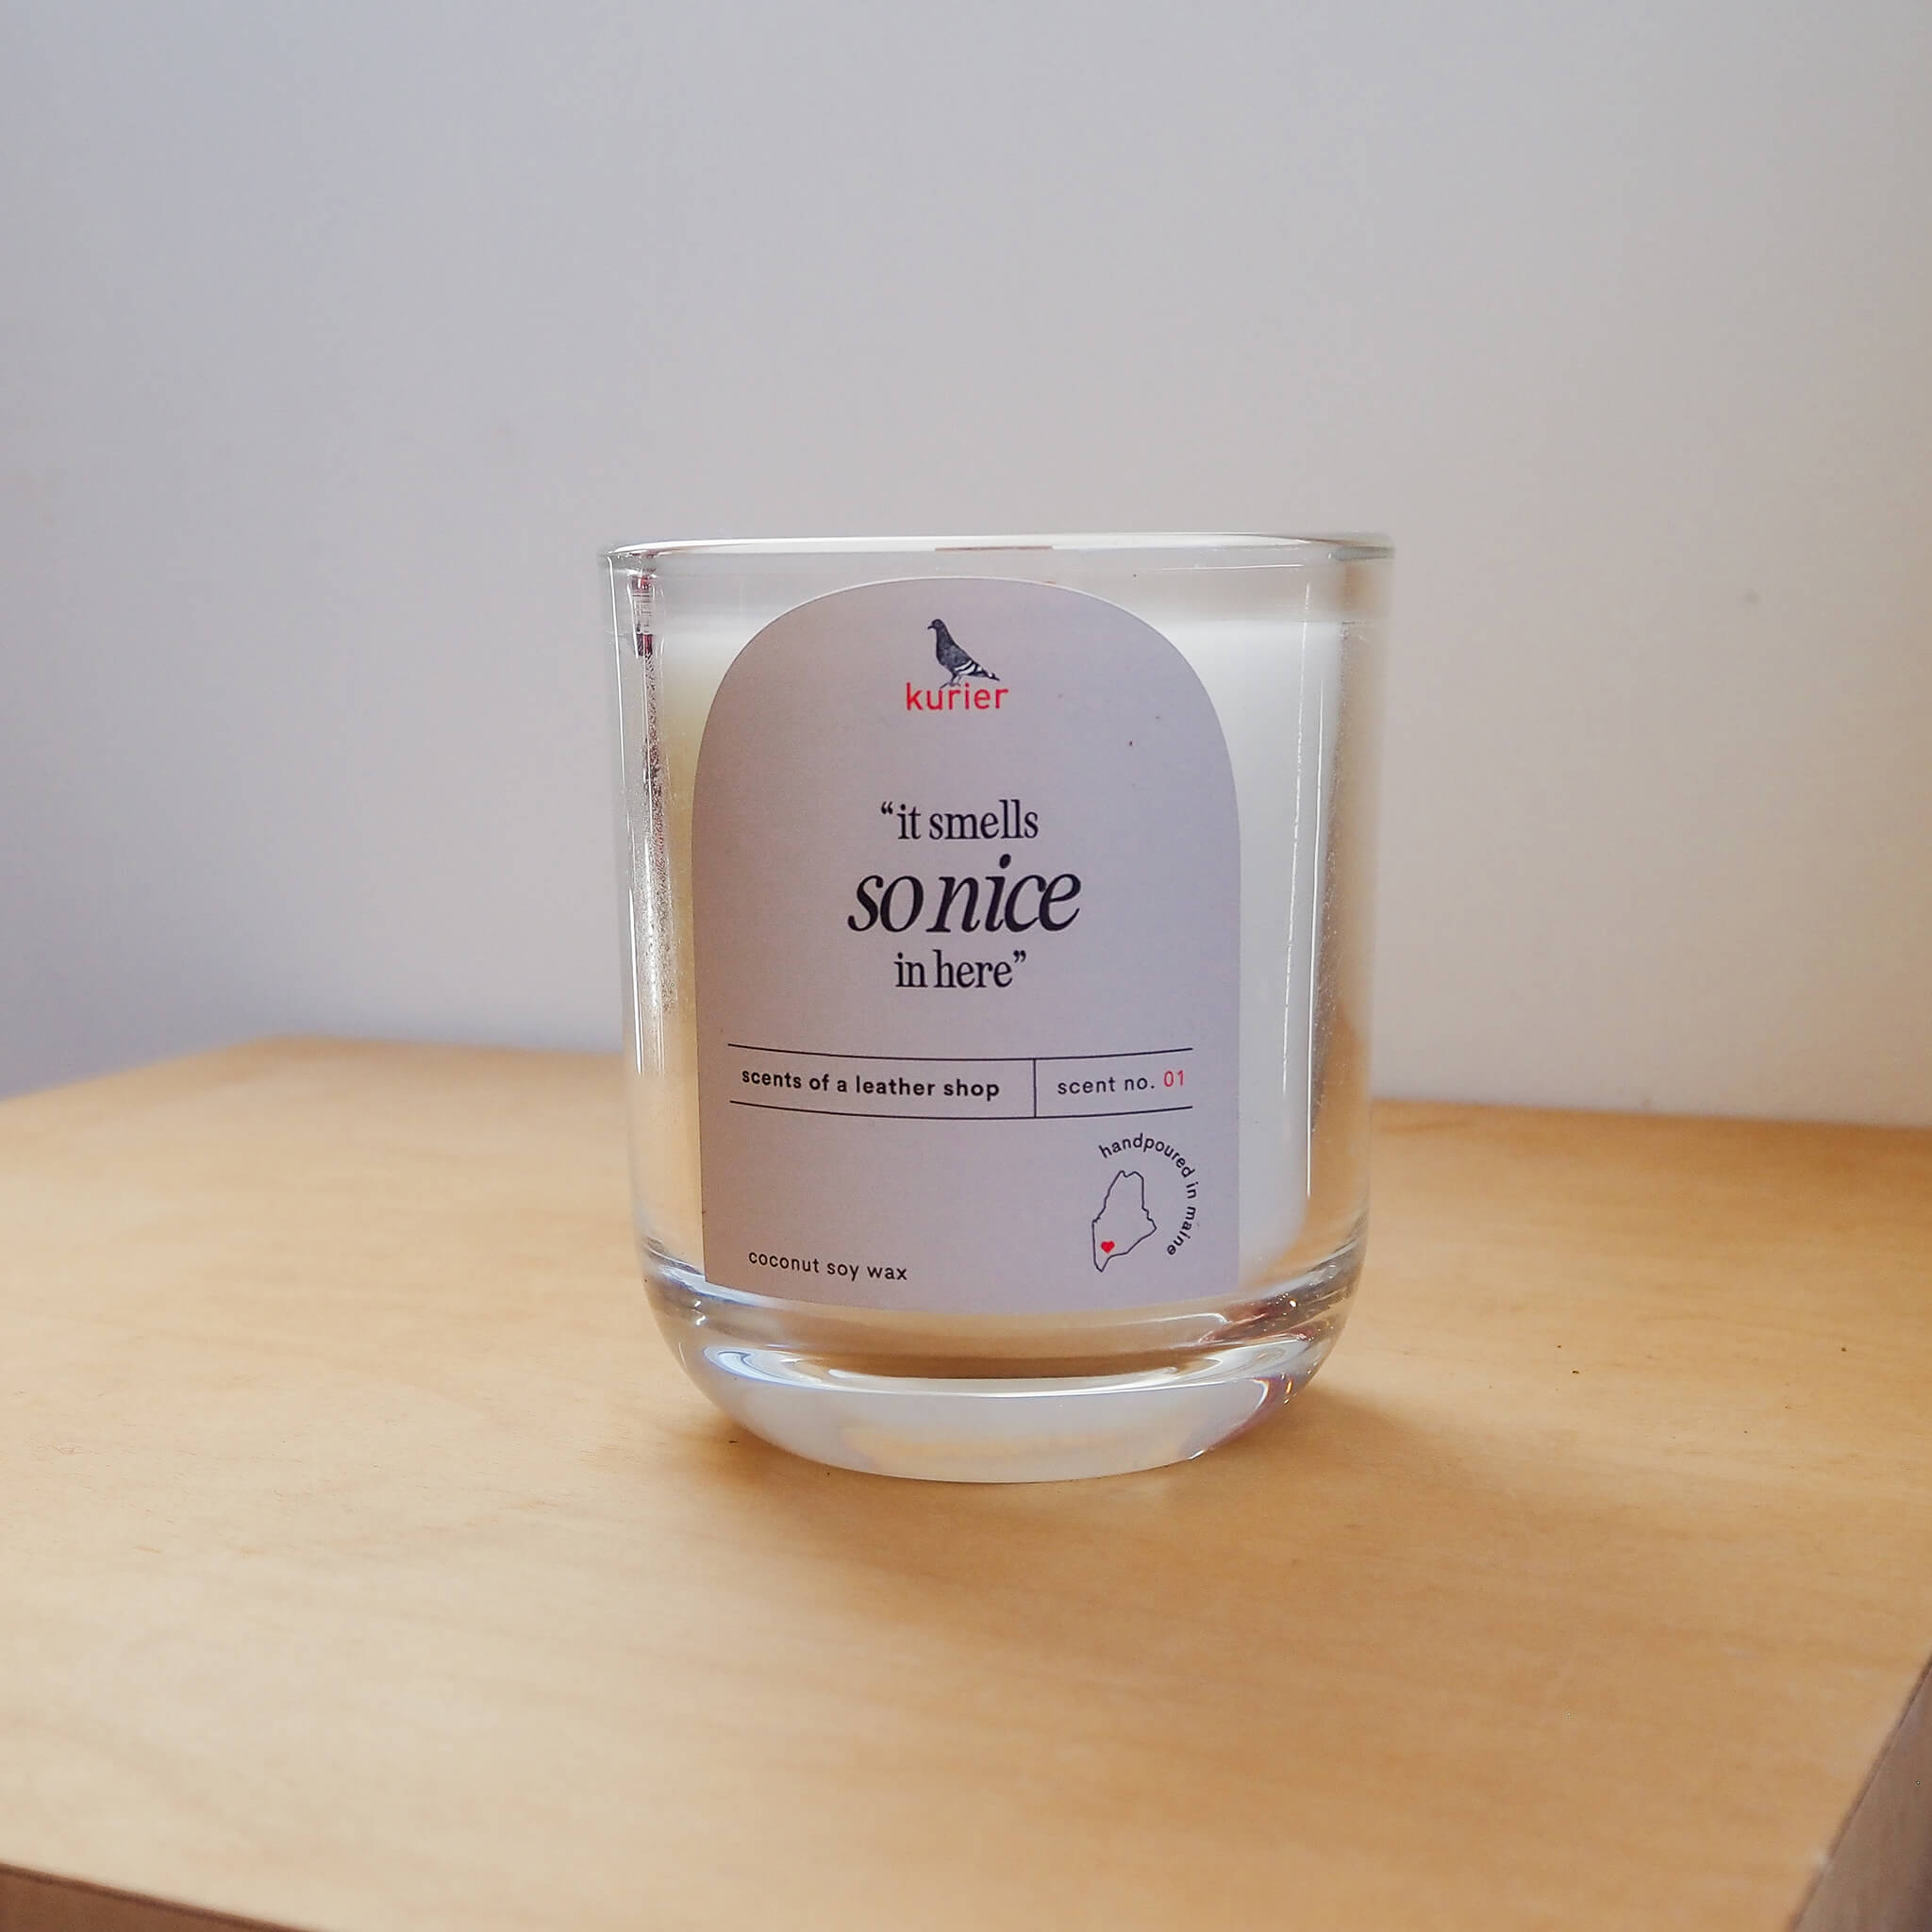 kurier's signature scented goods - glass candle - "it smells so nice in here"